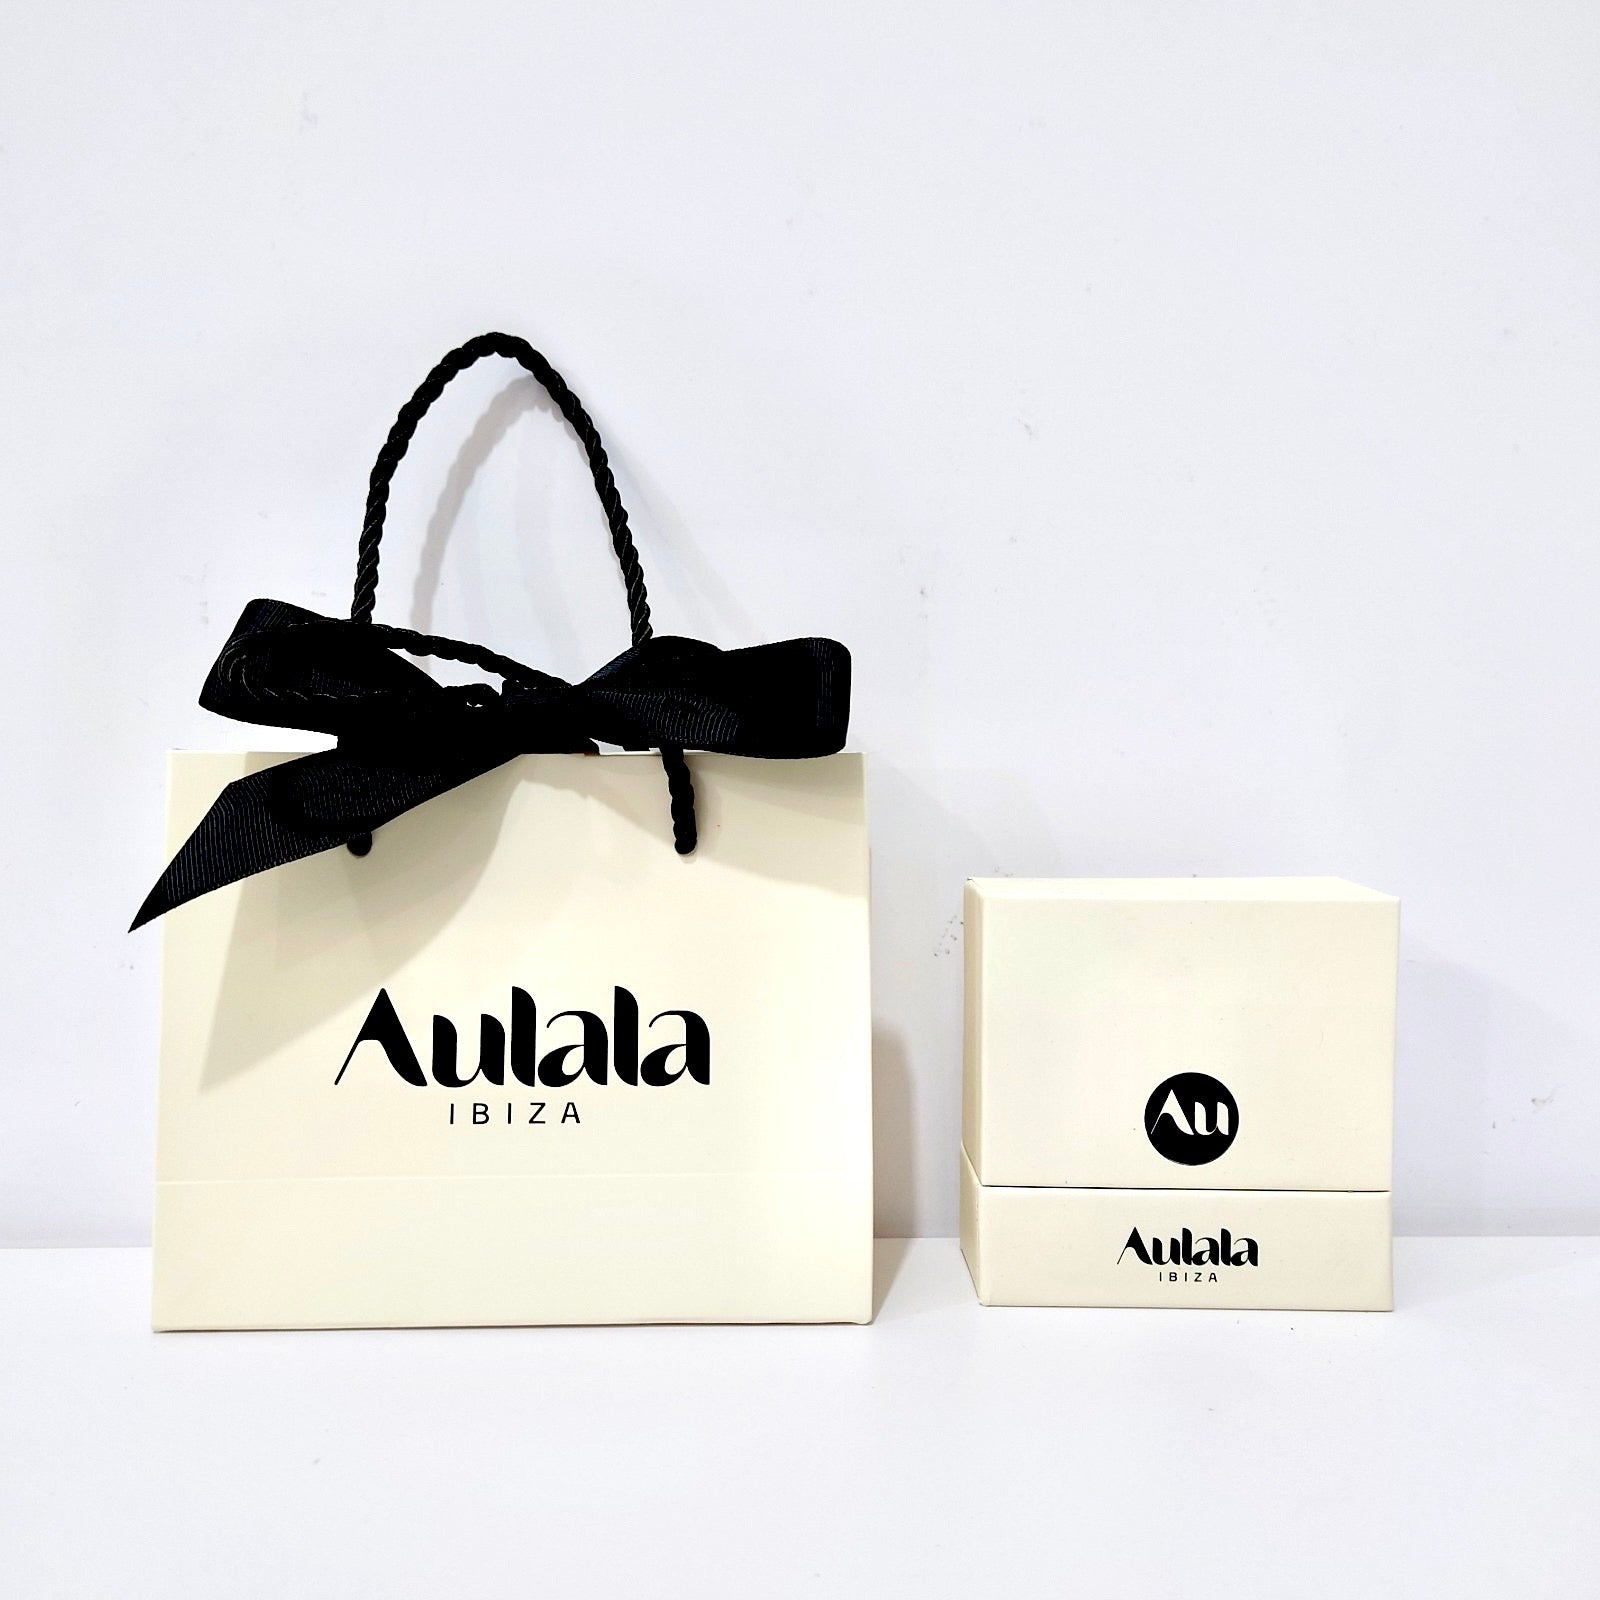 AuLaLa Cheeky Words Necklaces - Queen